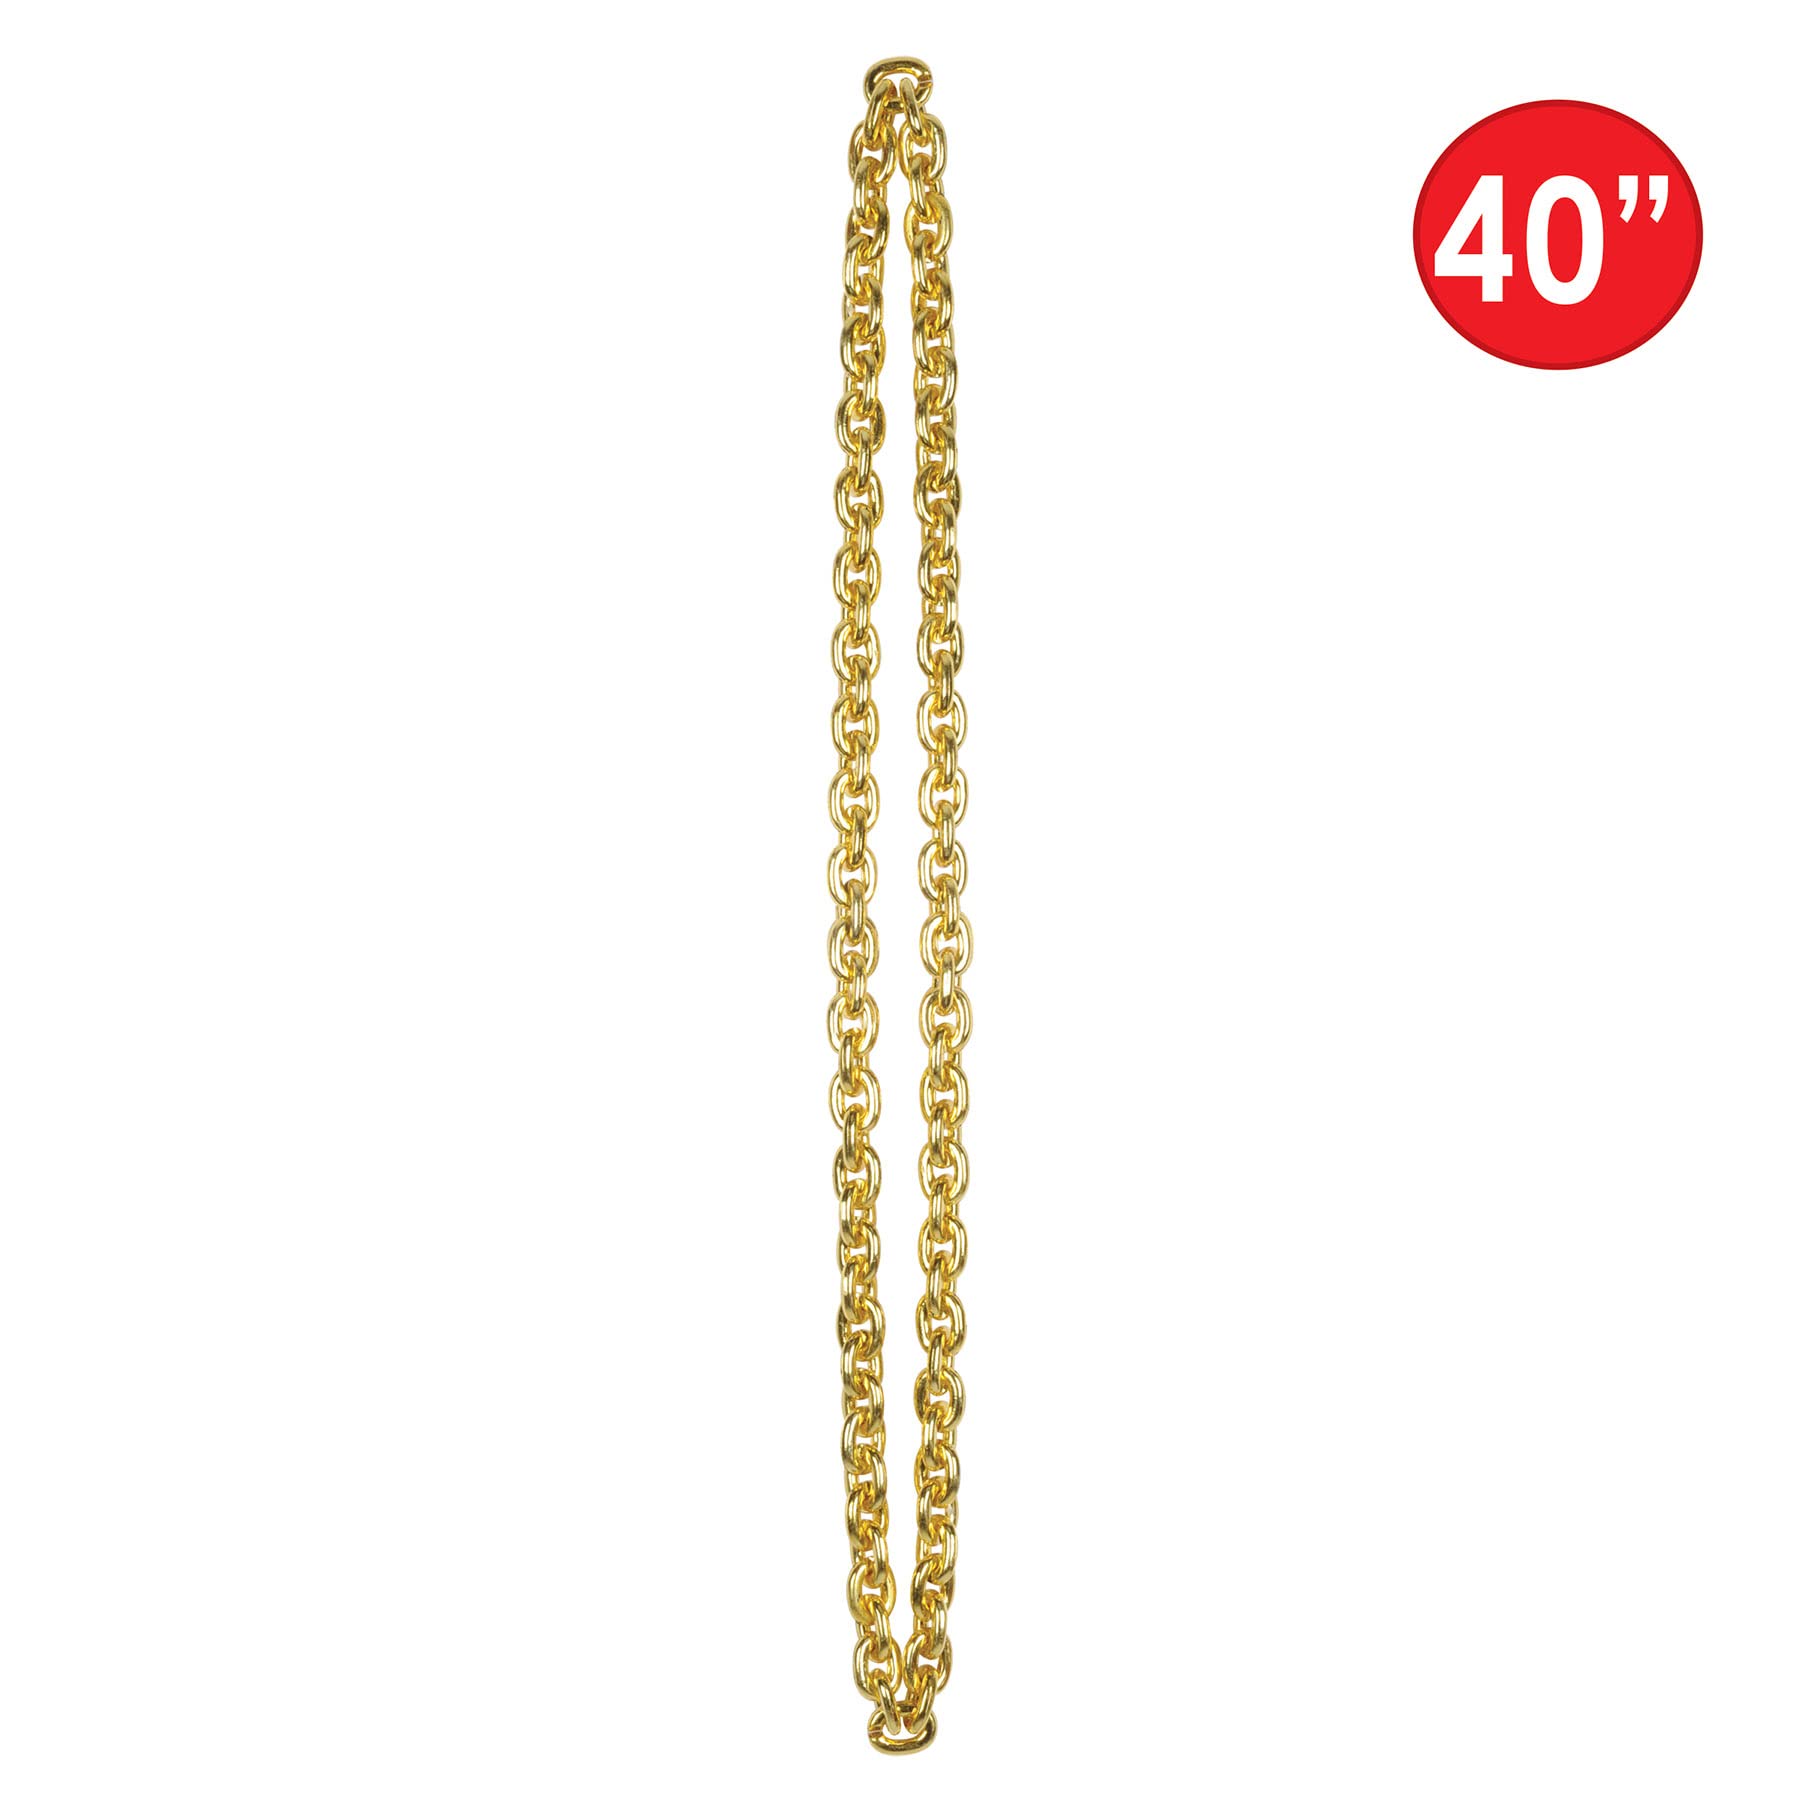 Chain Beads (gold) Party Accessory (1 count) (1/Card)